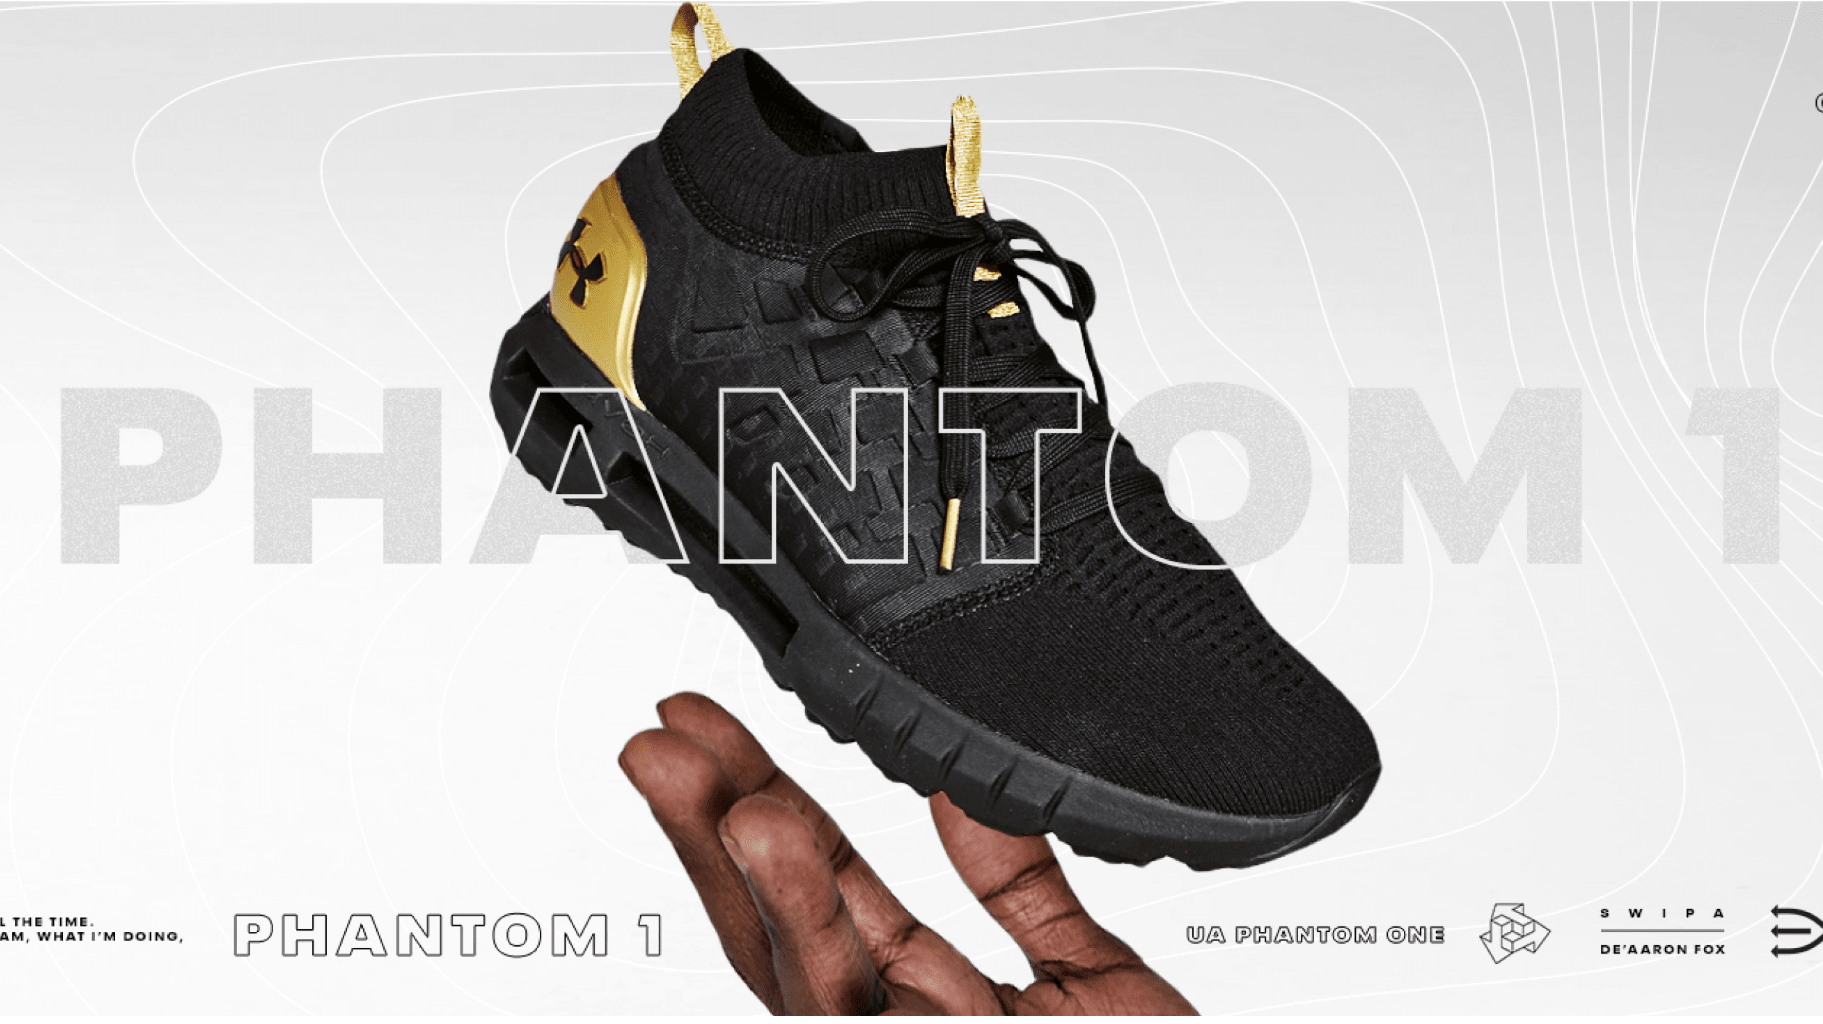 Side view of a black and gold Under Armour sneaker.